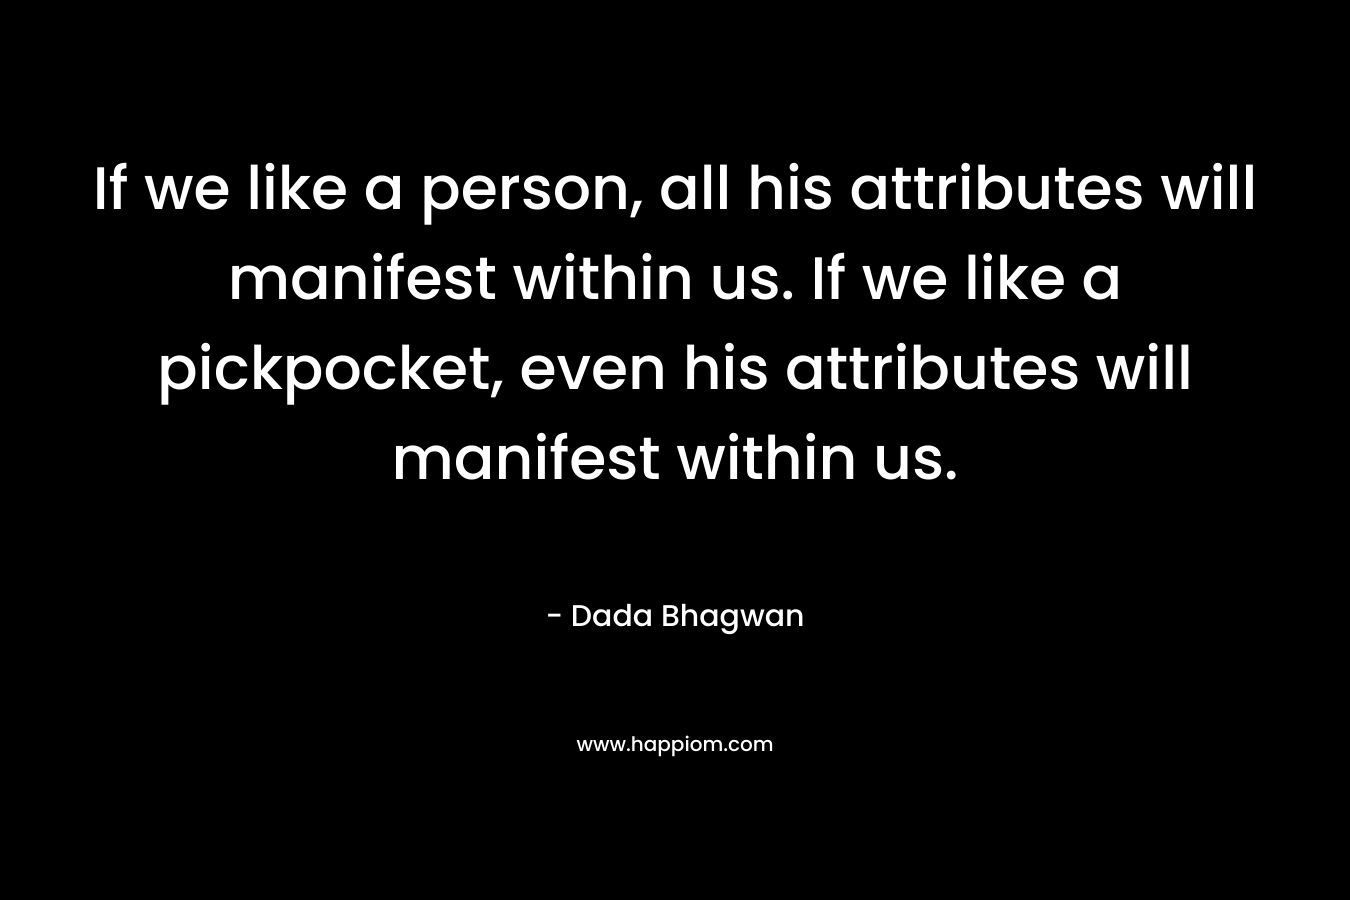 If we like a person, all his attributes will manifest within us. If we like a pickpocket, even his attributes will manifest within us.